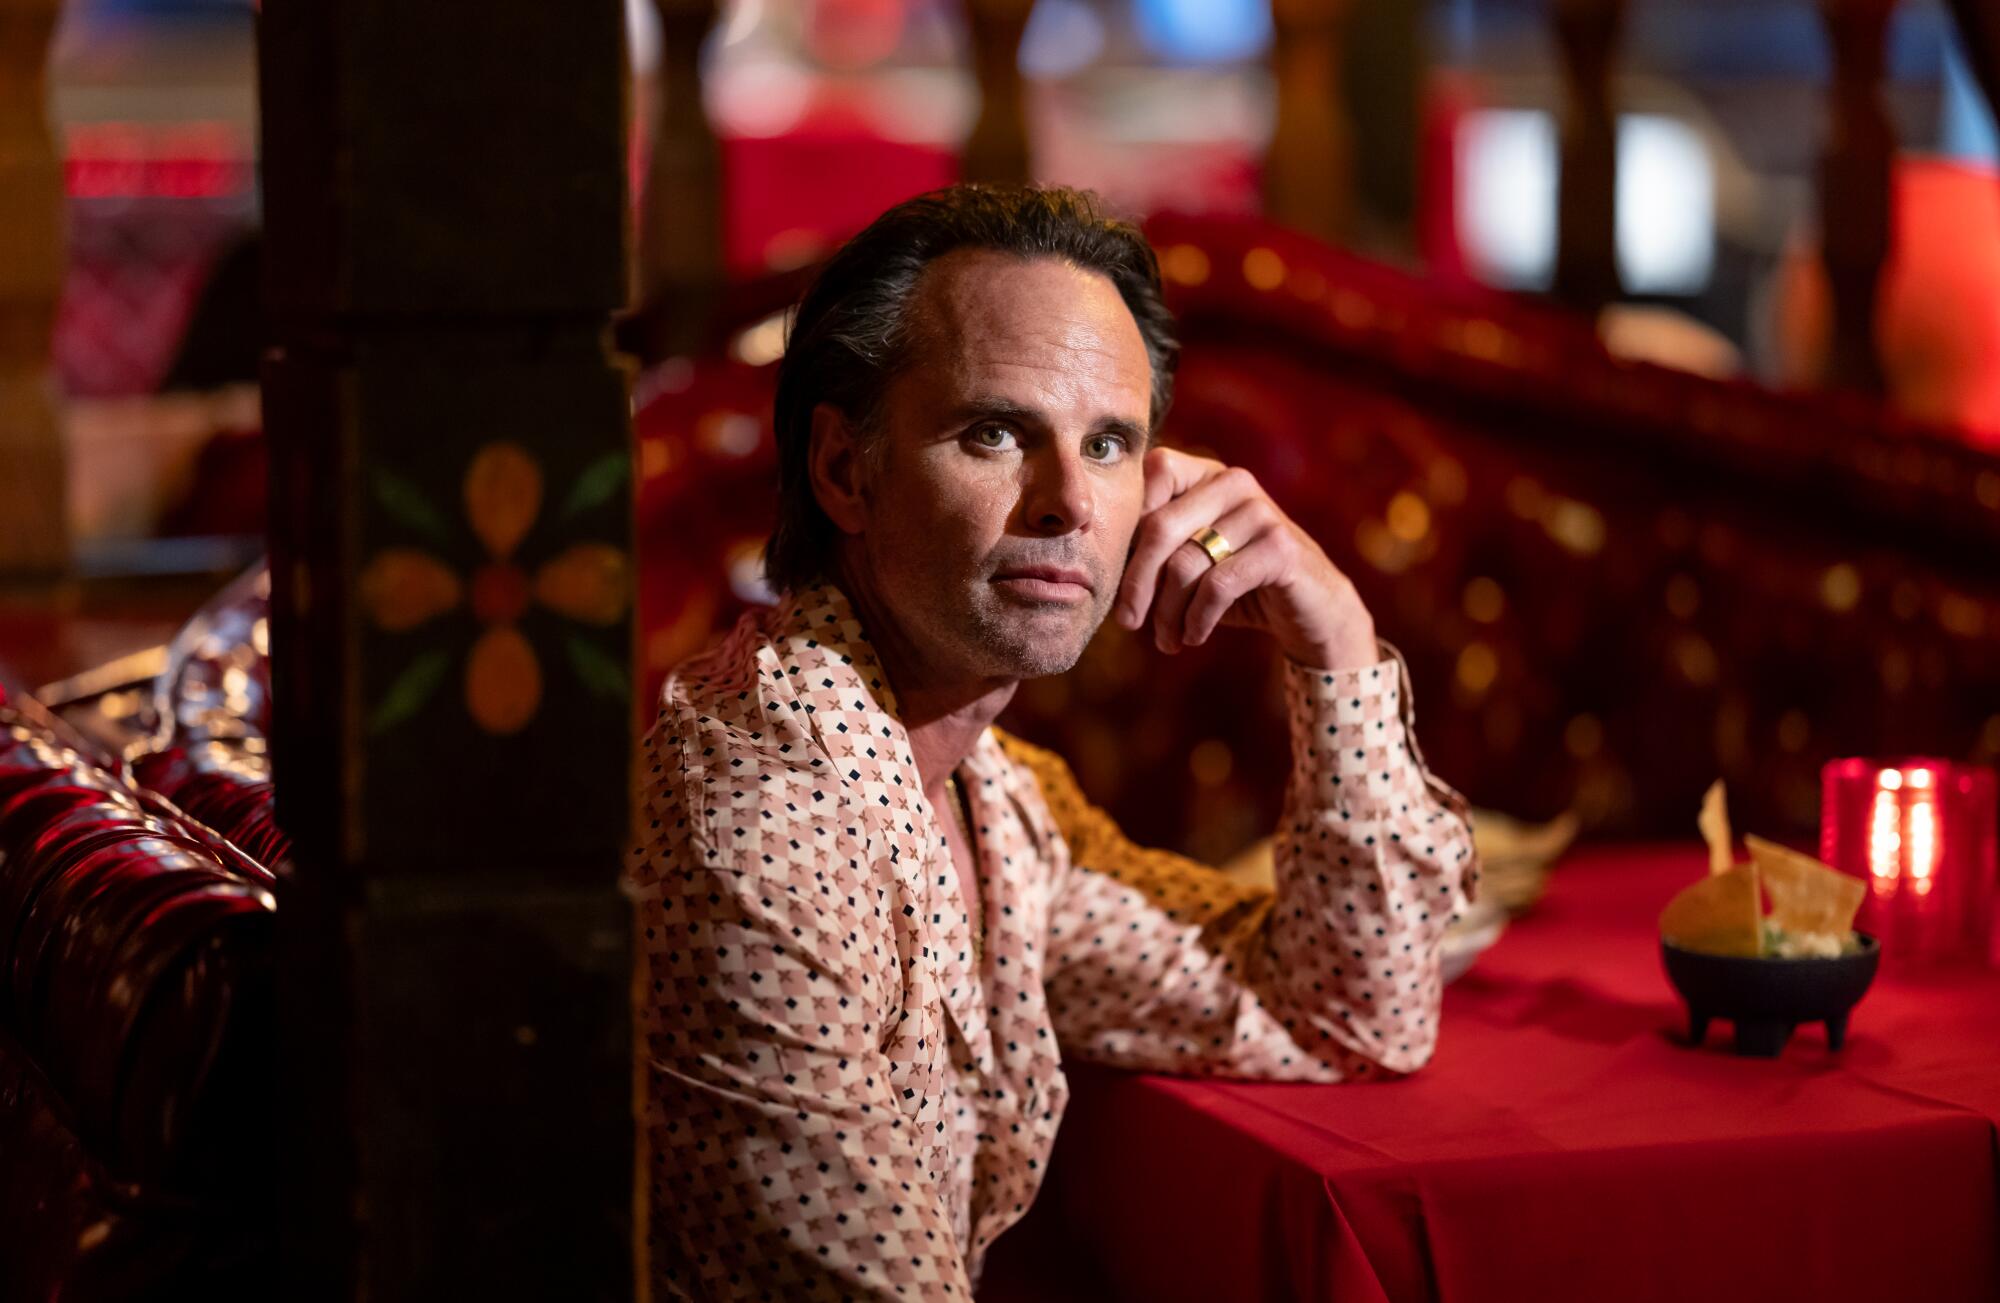 Walton Goggins sitting and leaning his arm on a table.